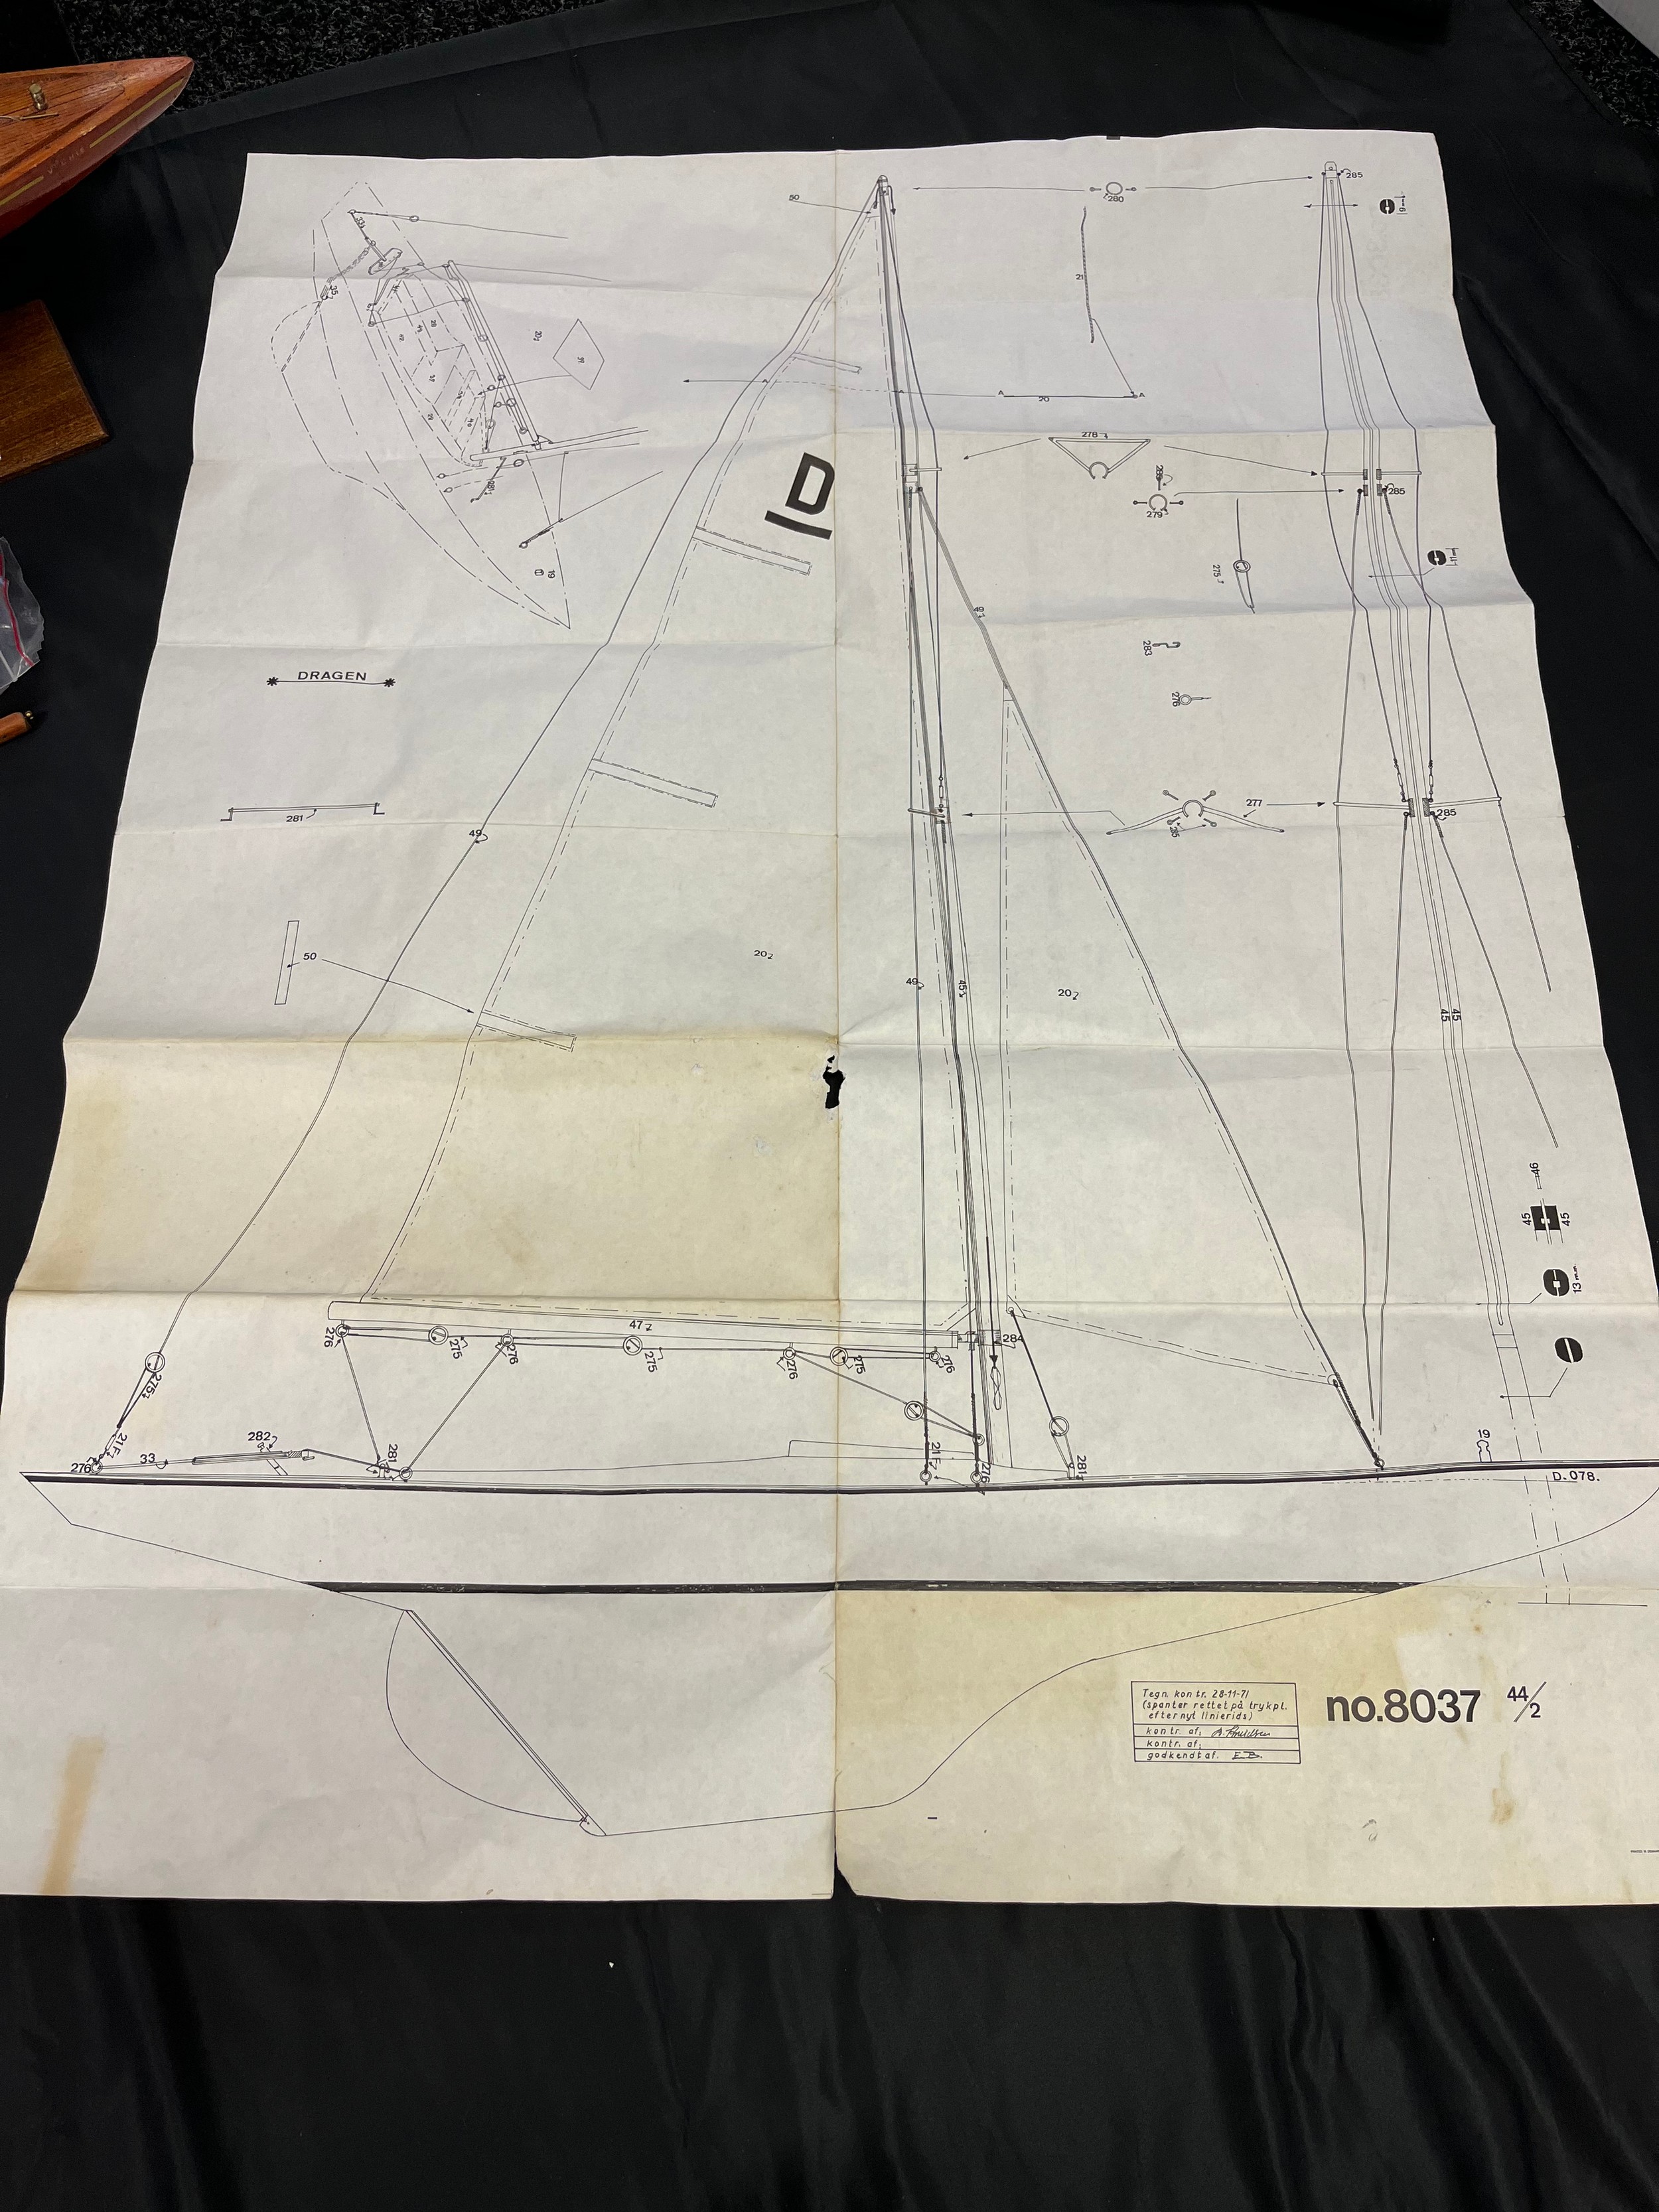 A Large model yacht sailing boat with blue prints - Image 2 of 5